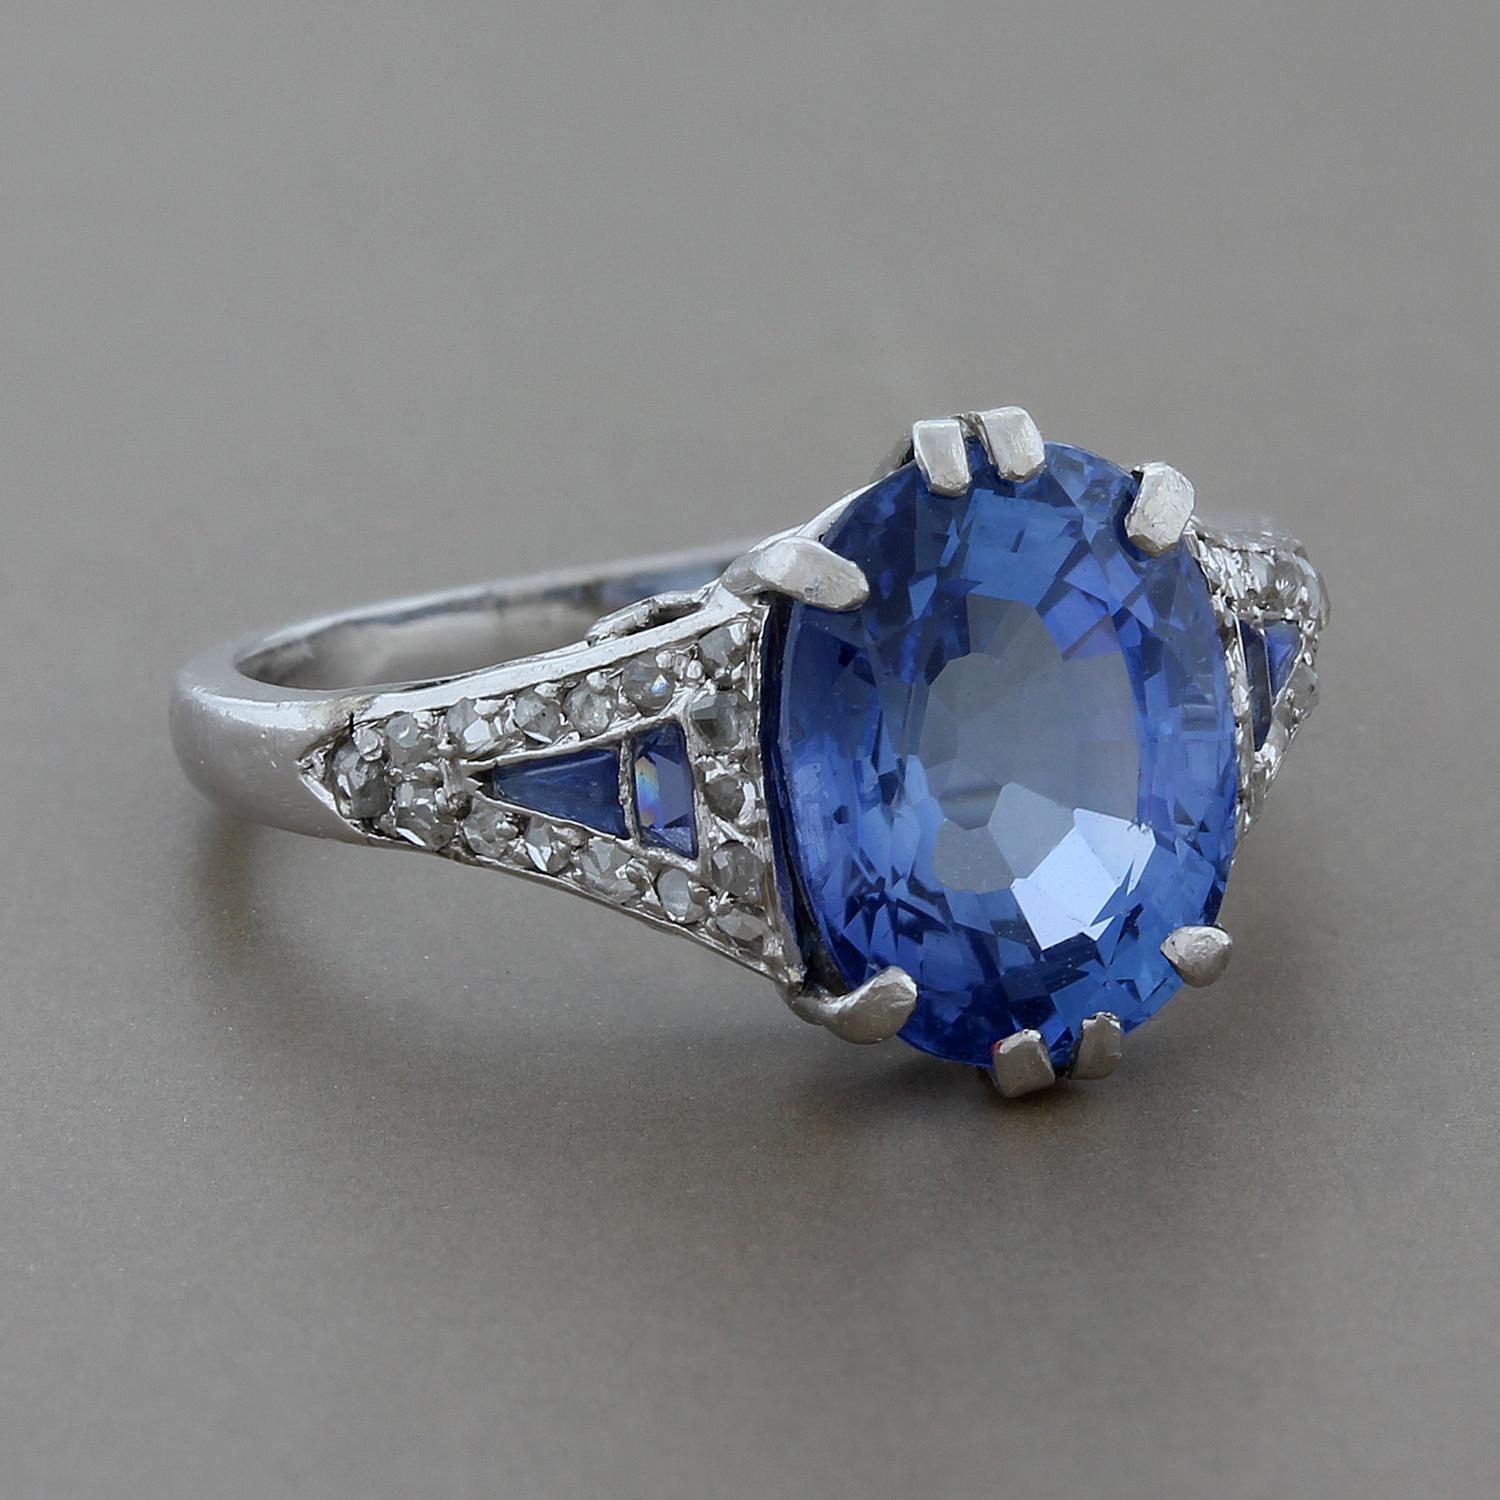 An exceptionally designed ring by designer Mauboussin. A 3.15 carat oval cut blue sapphire is adorned by 0.30 carats of diamonds and blue sapphires in a very special platinum setting

Currently ring size 5.75
